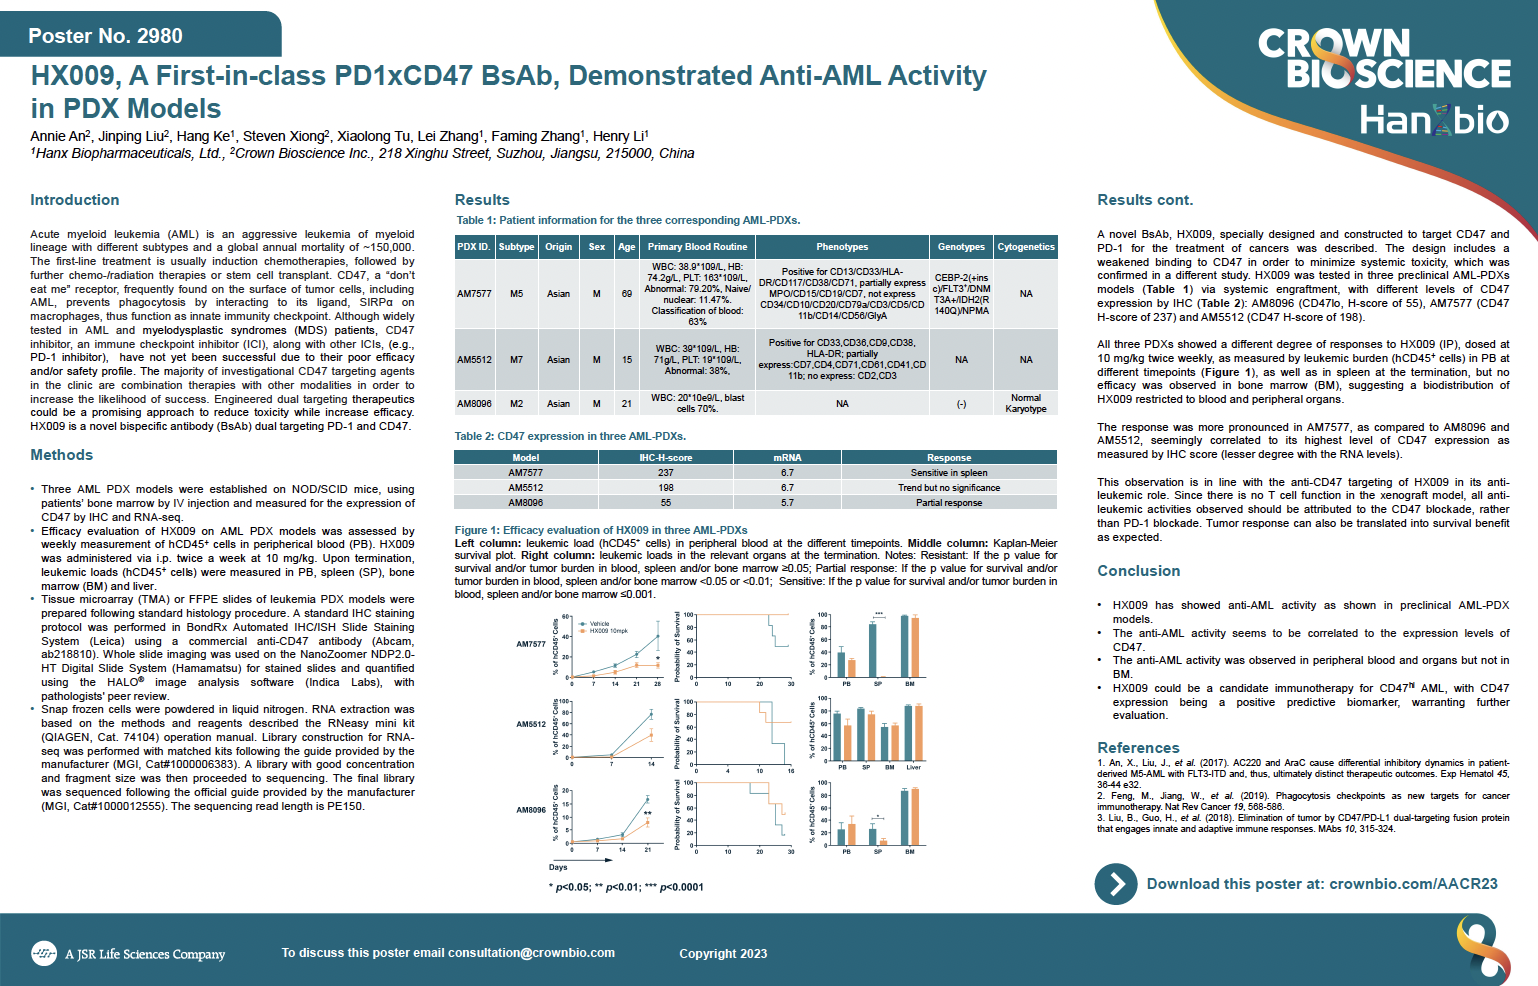 AACR 2023 Posters 2980: HX009, a First-in-class PD1xCD47 BsAb, Demonstrated Anti-AML Activity in PDX Models